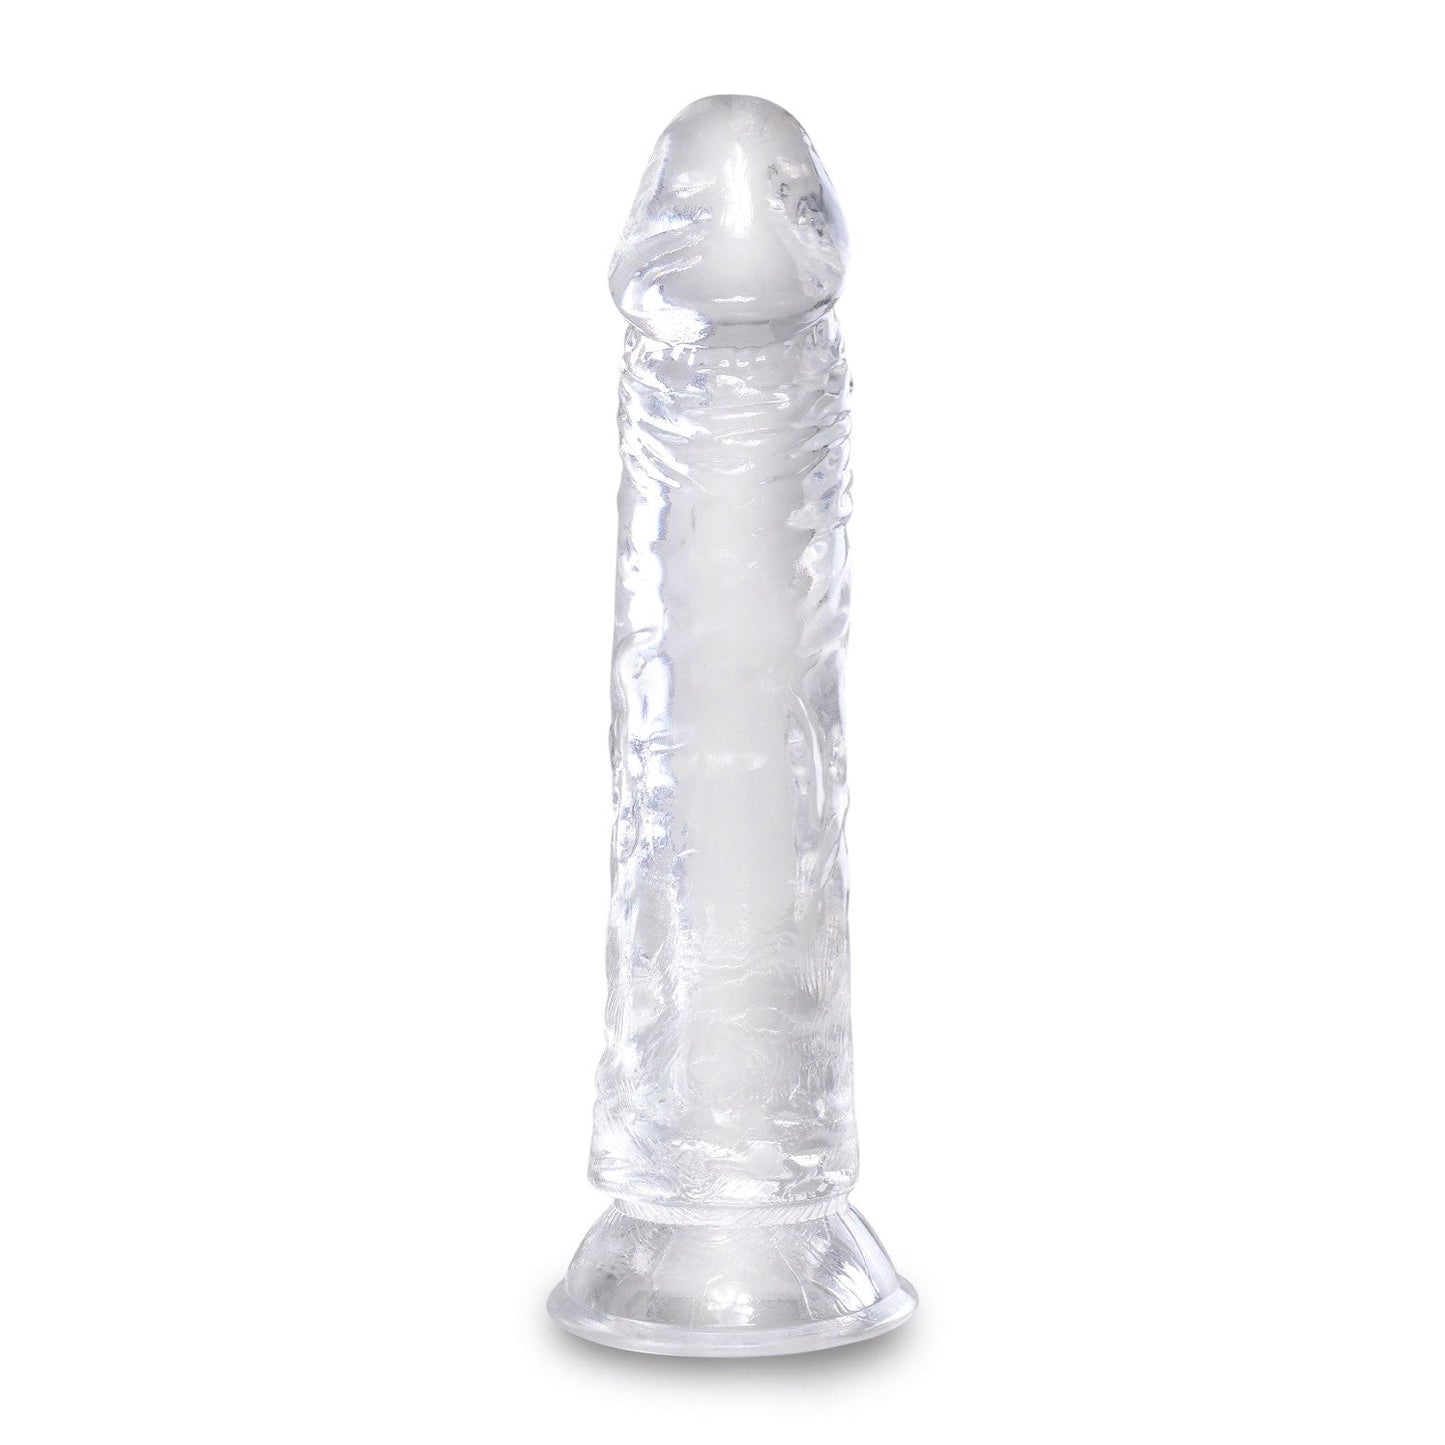 Clear 8" Cock - Clear 20.3 cm Dong